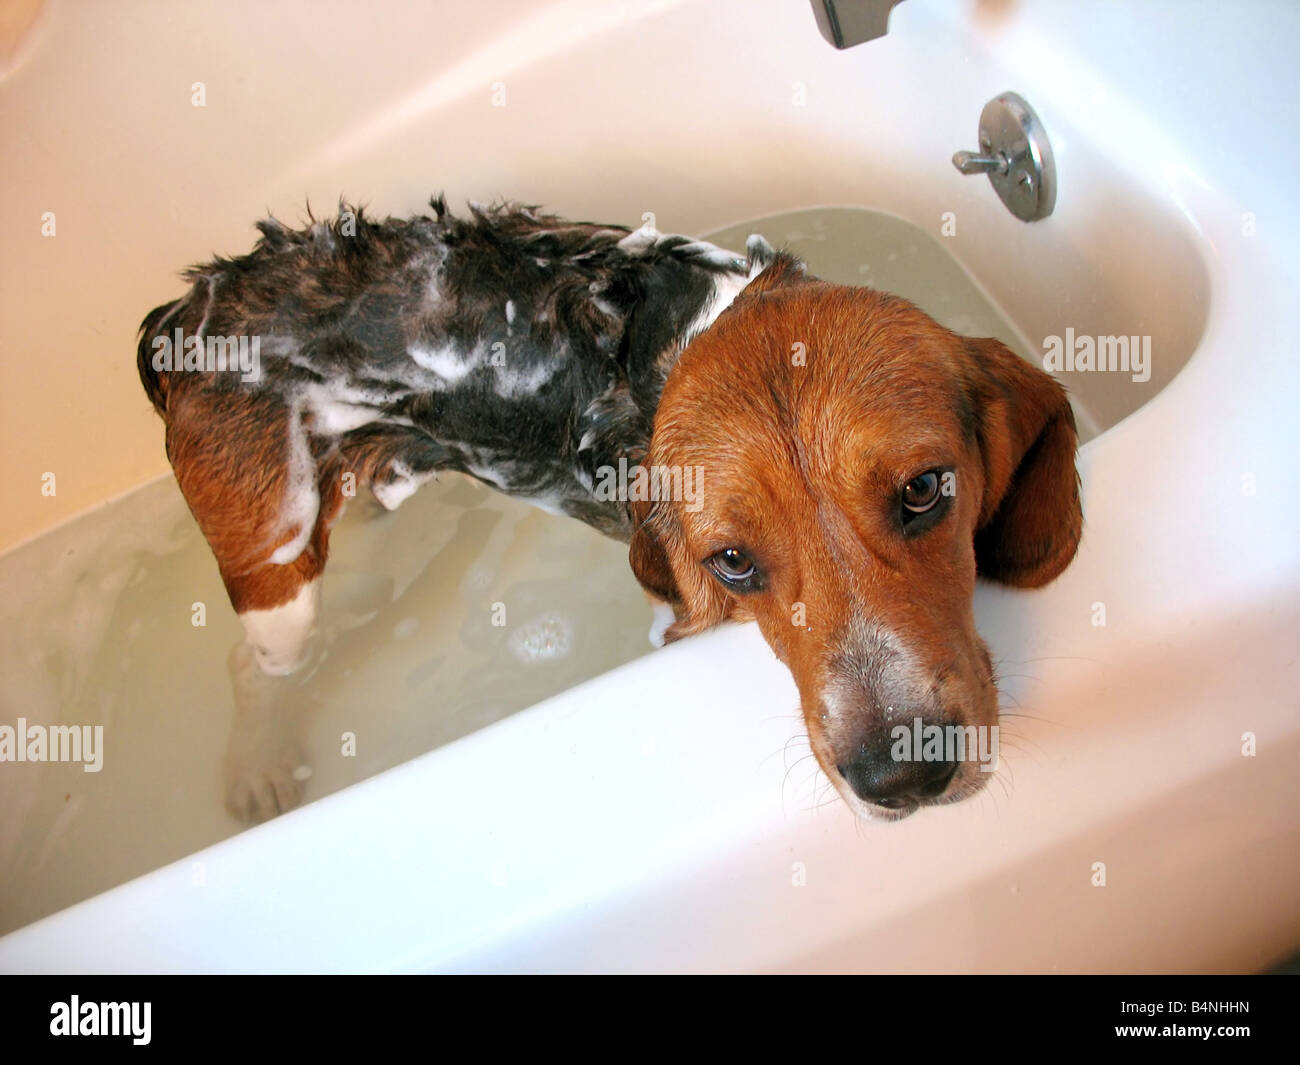 A beagle dog about a year old getting a bath Stock Photo